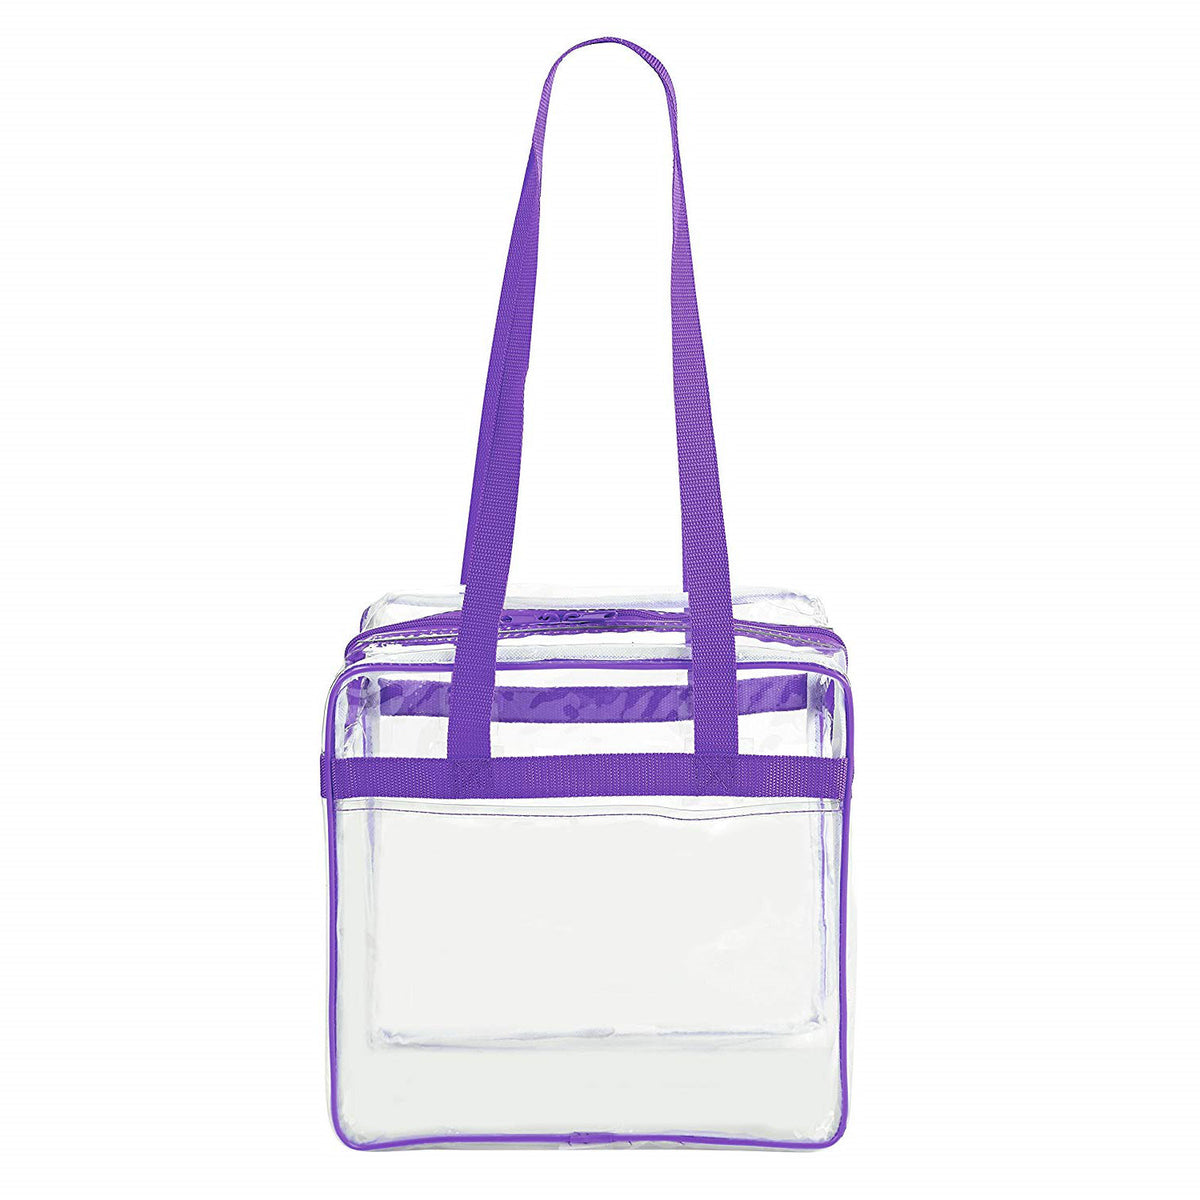 12 x 6 x 12 Medium Bridal Party Clear Vinyl Tote Bags with Pink Trim - 6  Pc.